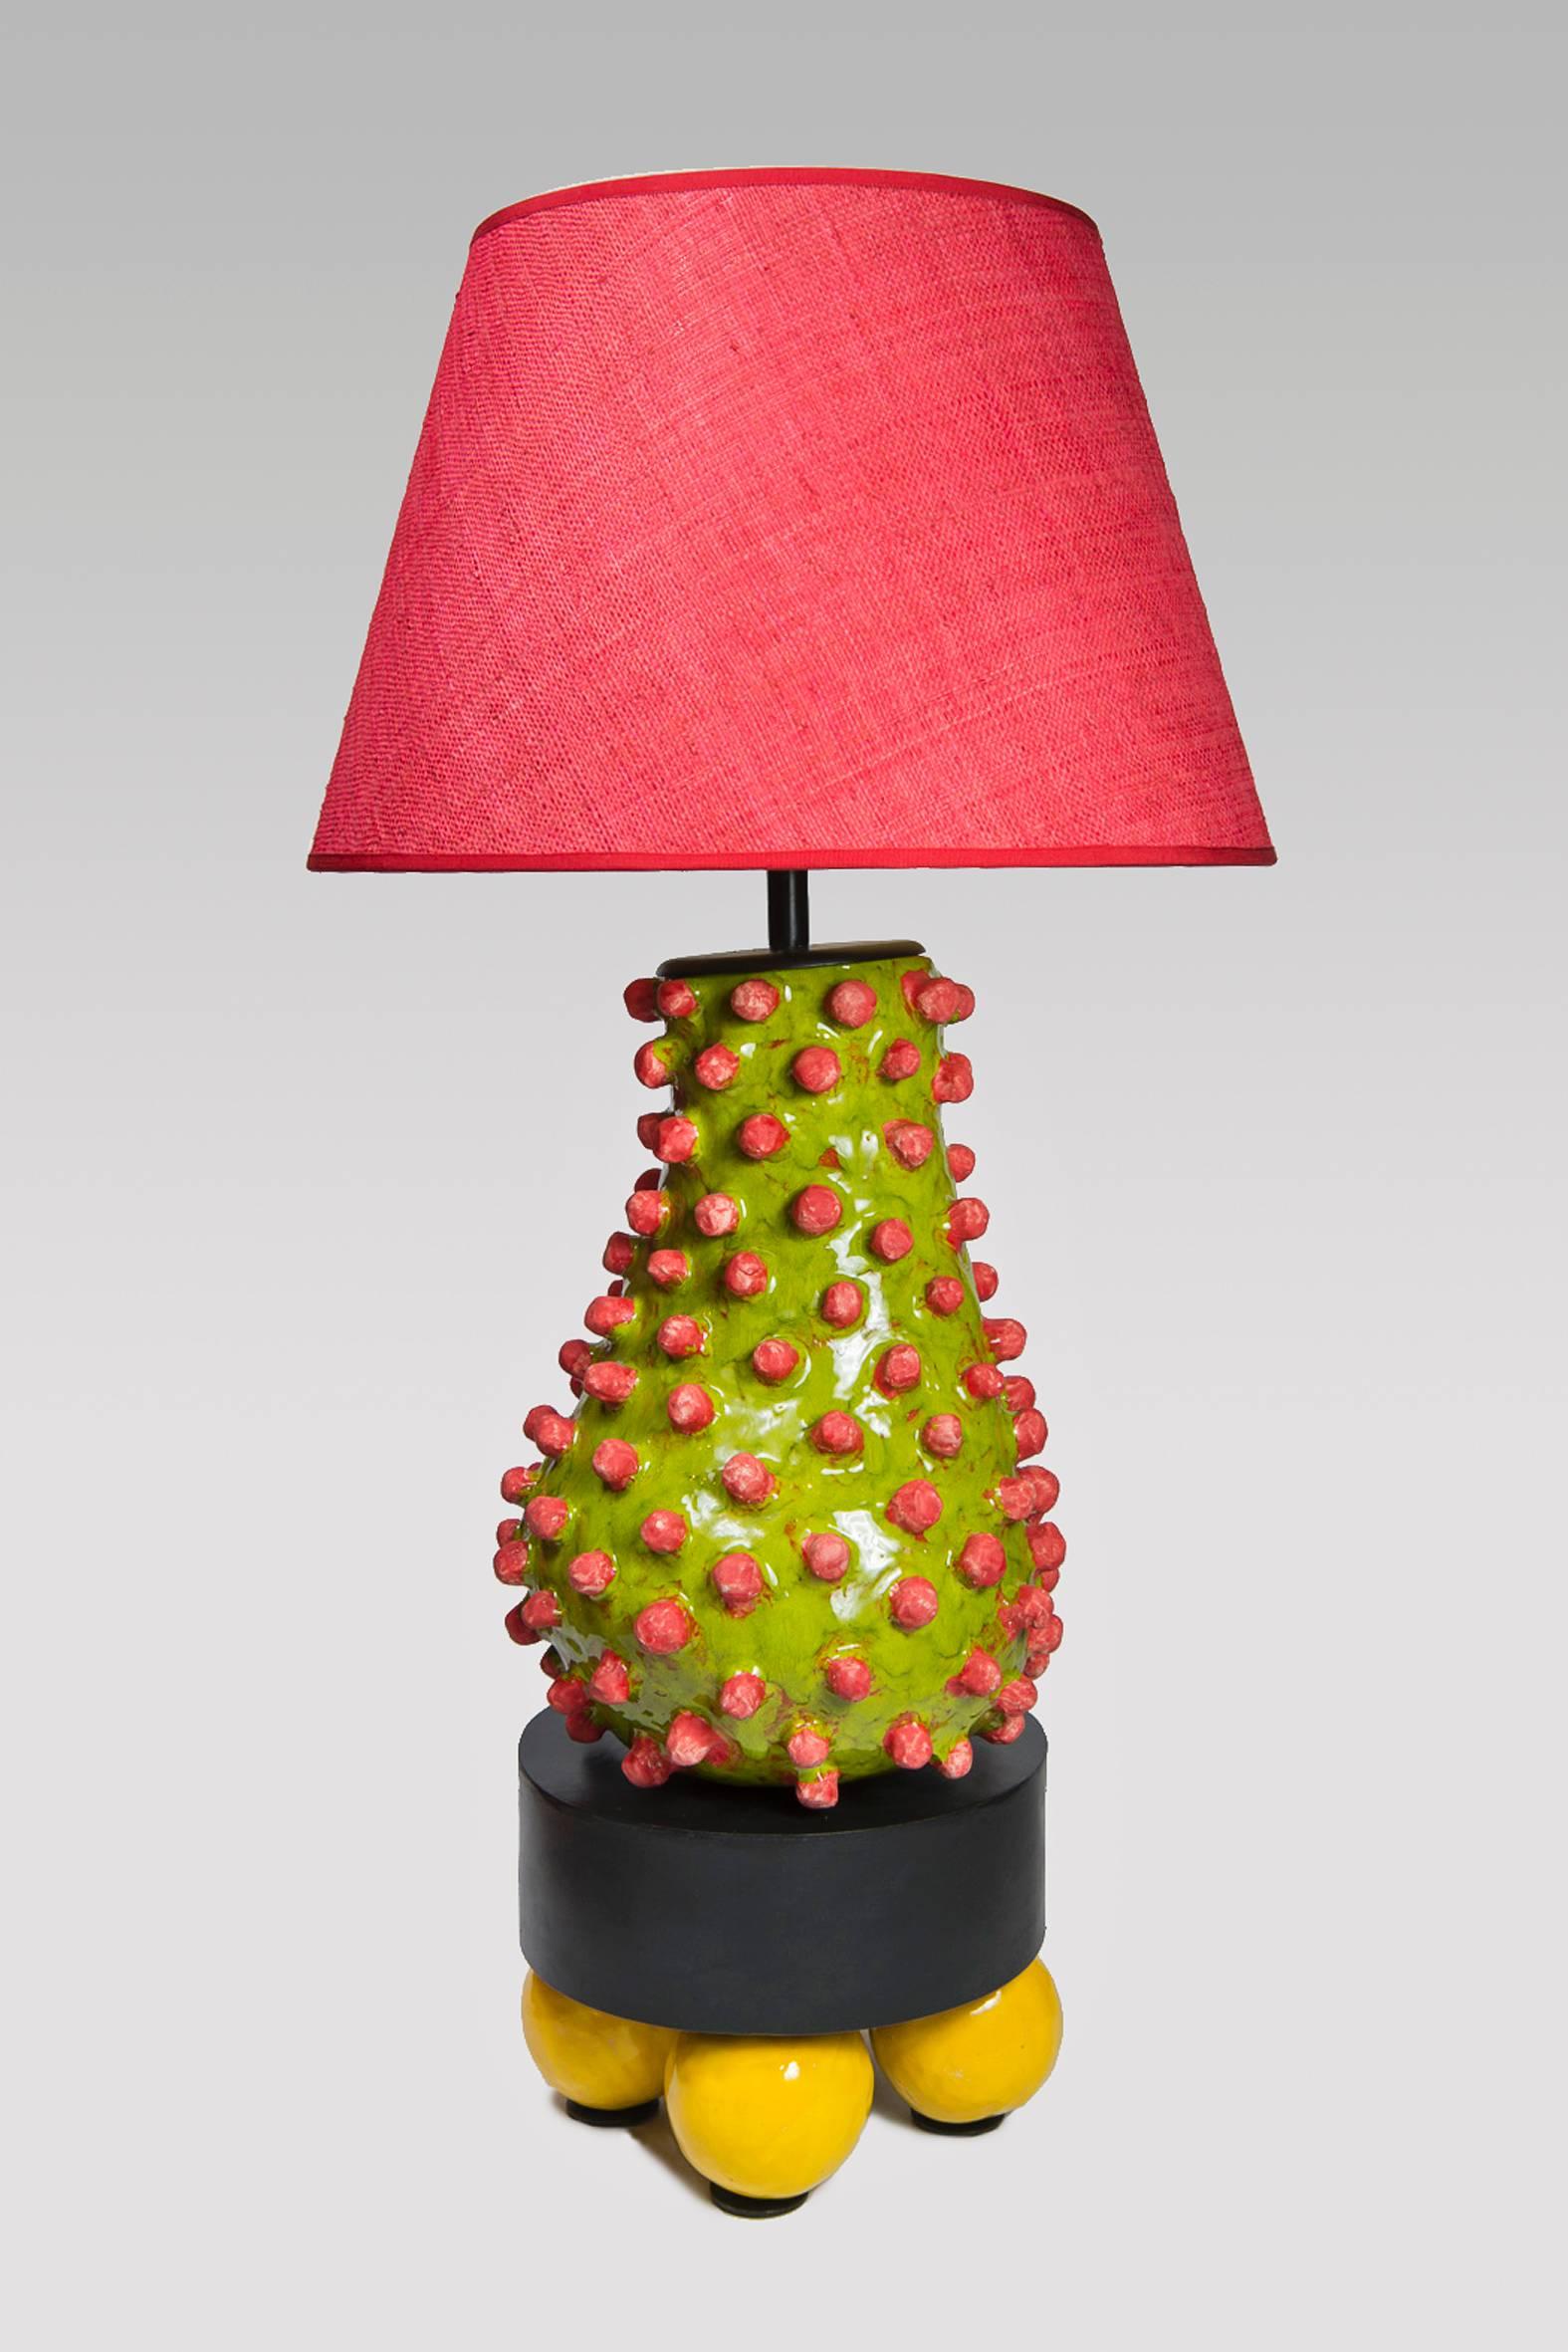 Alice Gavalet, table lamp Loulou, 2015, glazed ceramic, patina steel, signed, unique piece. Measures: 96 X 35 cm.

Alice Gavalet.
Born in 1978, France.
Education
2003 Diploma in Industrial Design, Ecole Nationale Supe´rieure des Arts